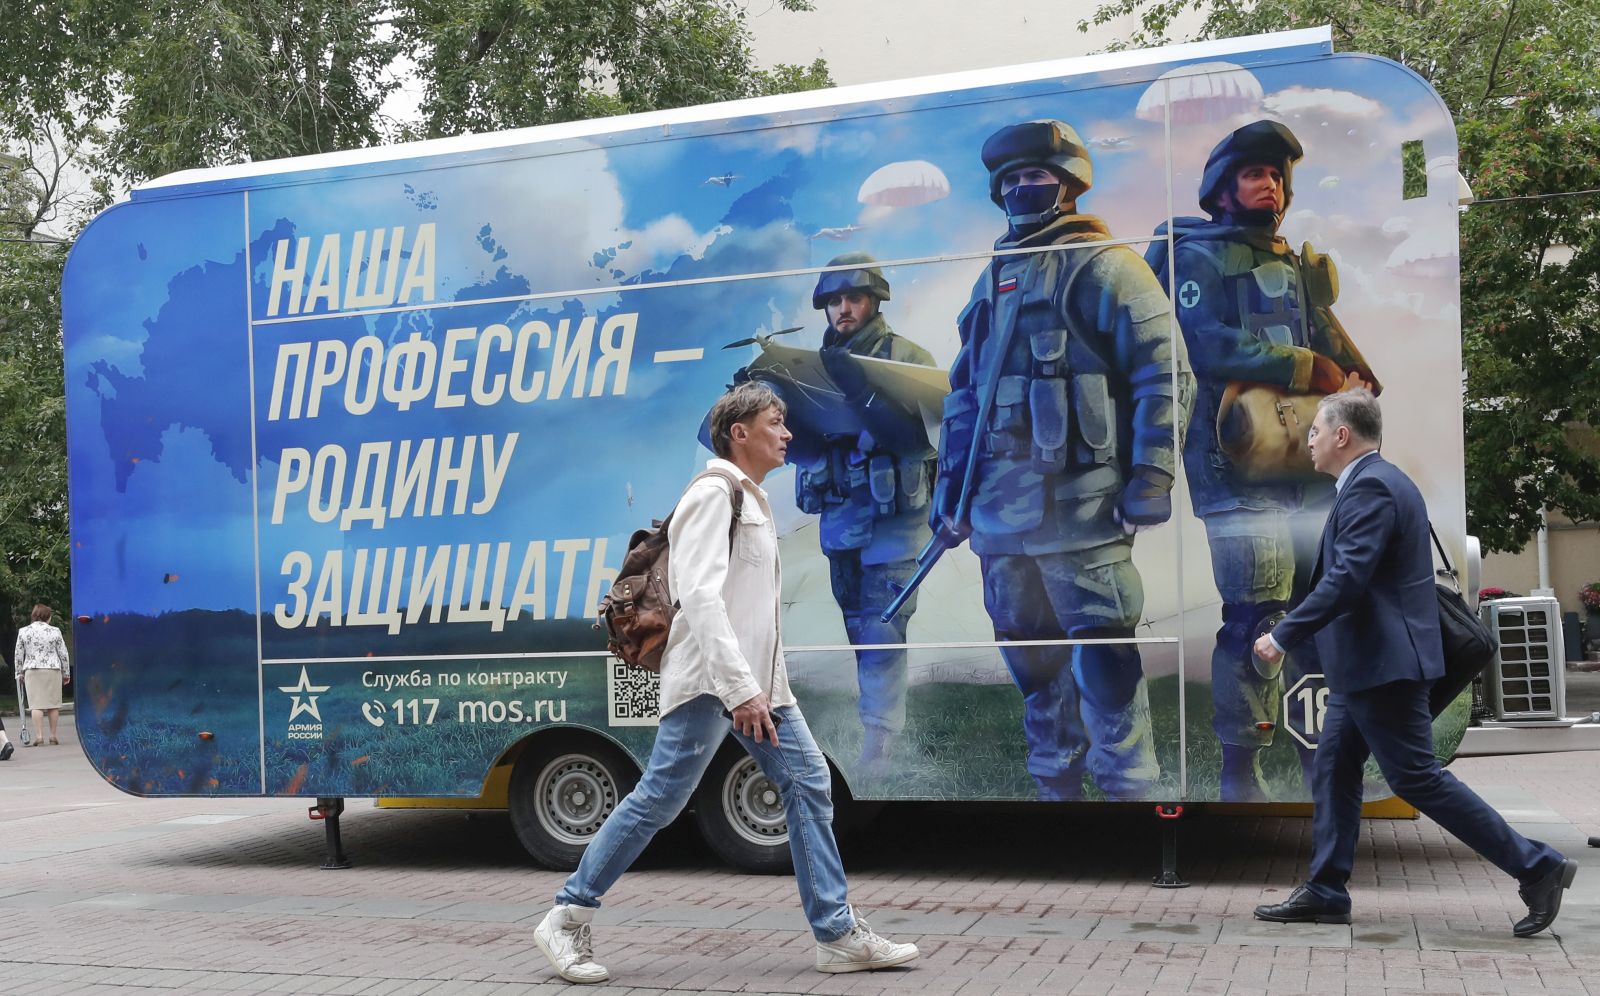 epa10715407 A mobile recruiting office where men can sign a contract with the Russian Ministry of Defense in downtown Moscow, Russia, 28 June 2023. On 24 June, counter-terrorism measures were enforced in Moscow and other Russian regions after private military company (PMC) Wagner Group chief Yevgeny Prigozhin claimed that his troops had occupied the building of the headquarters of the Southern Military District in Rostov-on-Don, demanding a meeting with Russia's defense chiefs. Belarusian President Lukashenko, a close ally of Putin, negotiated a deal with Wagner chief Prigozhin to stop the movement of the group's fighters across Russia, the press service of the President of Belarus reported. The negotiations were said to have lasted for the entire day. Prigozhin announced that Wagner fighters were turning their columns around and going back in the other direction, returning to their field camps.  EPA/MAXIM SHIPENKOV